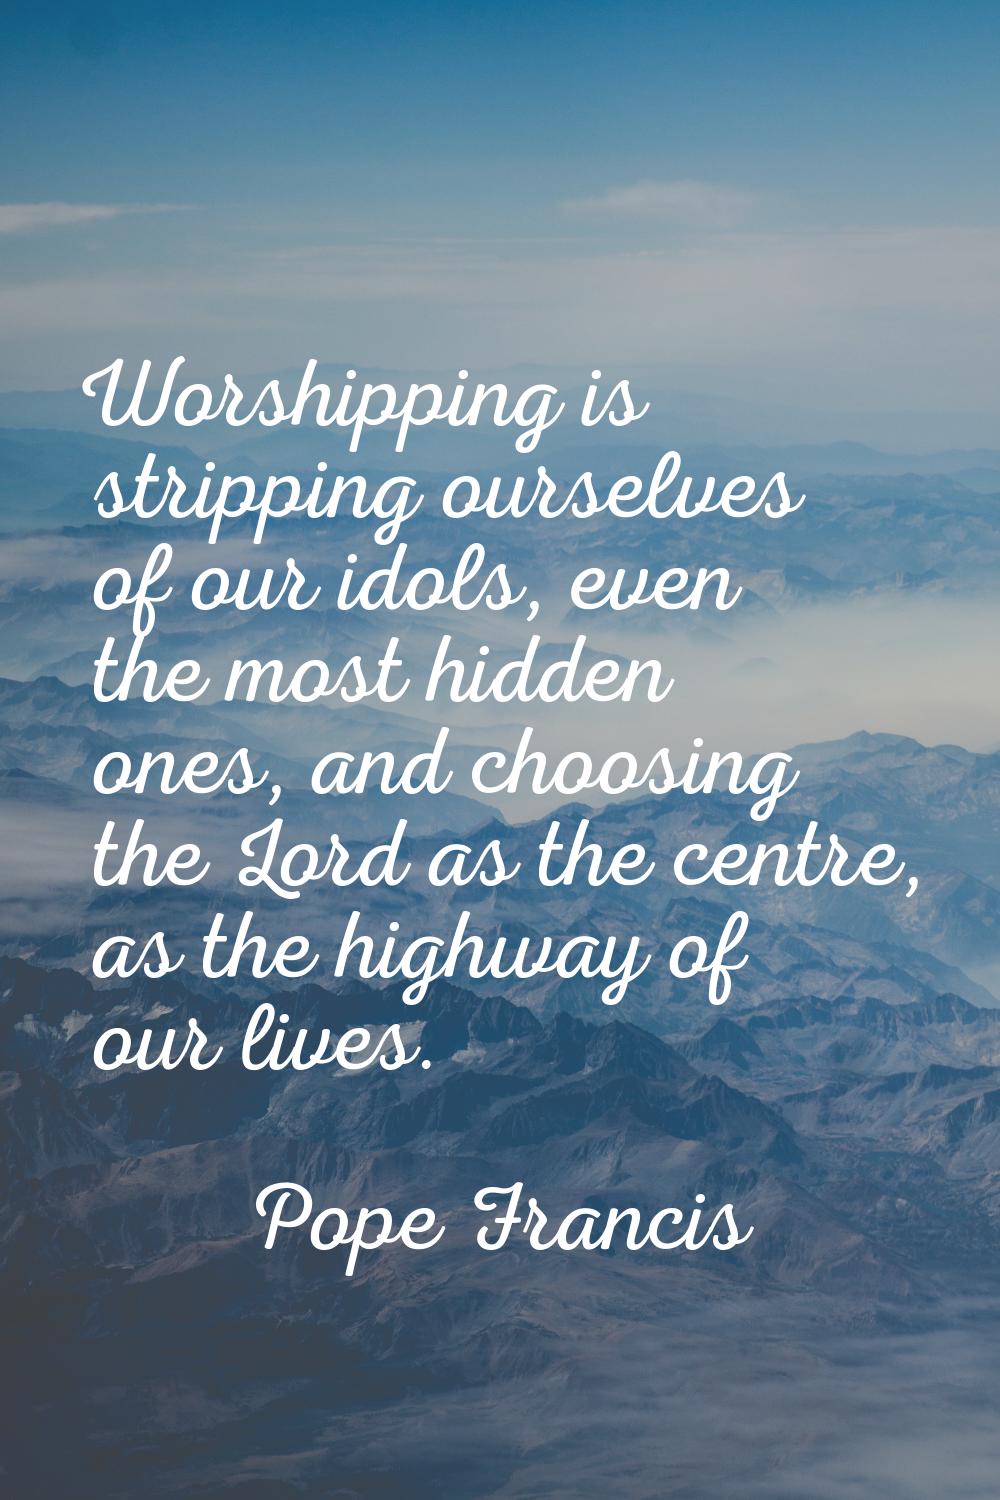 Worshipping is stripping ourselves of our idols, even the most hidden ones, and choosing the Lord a